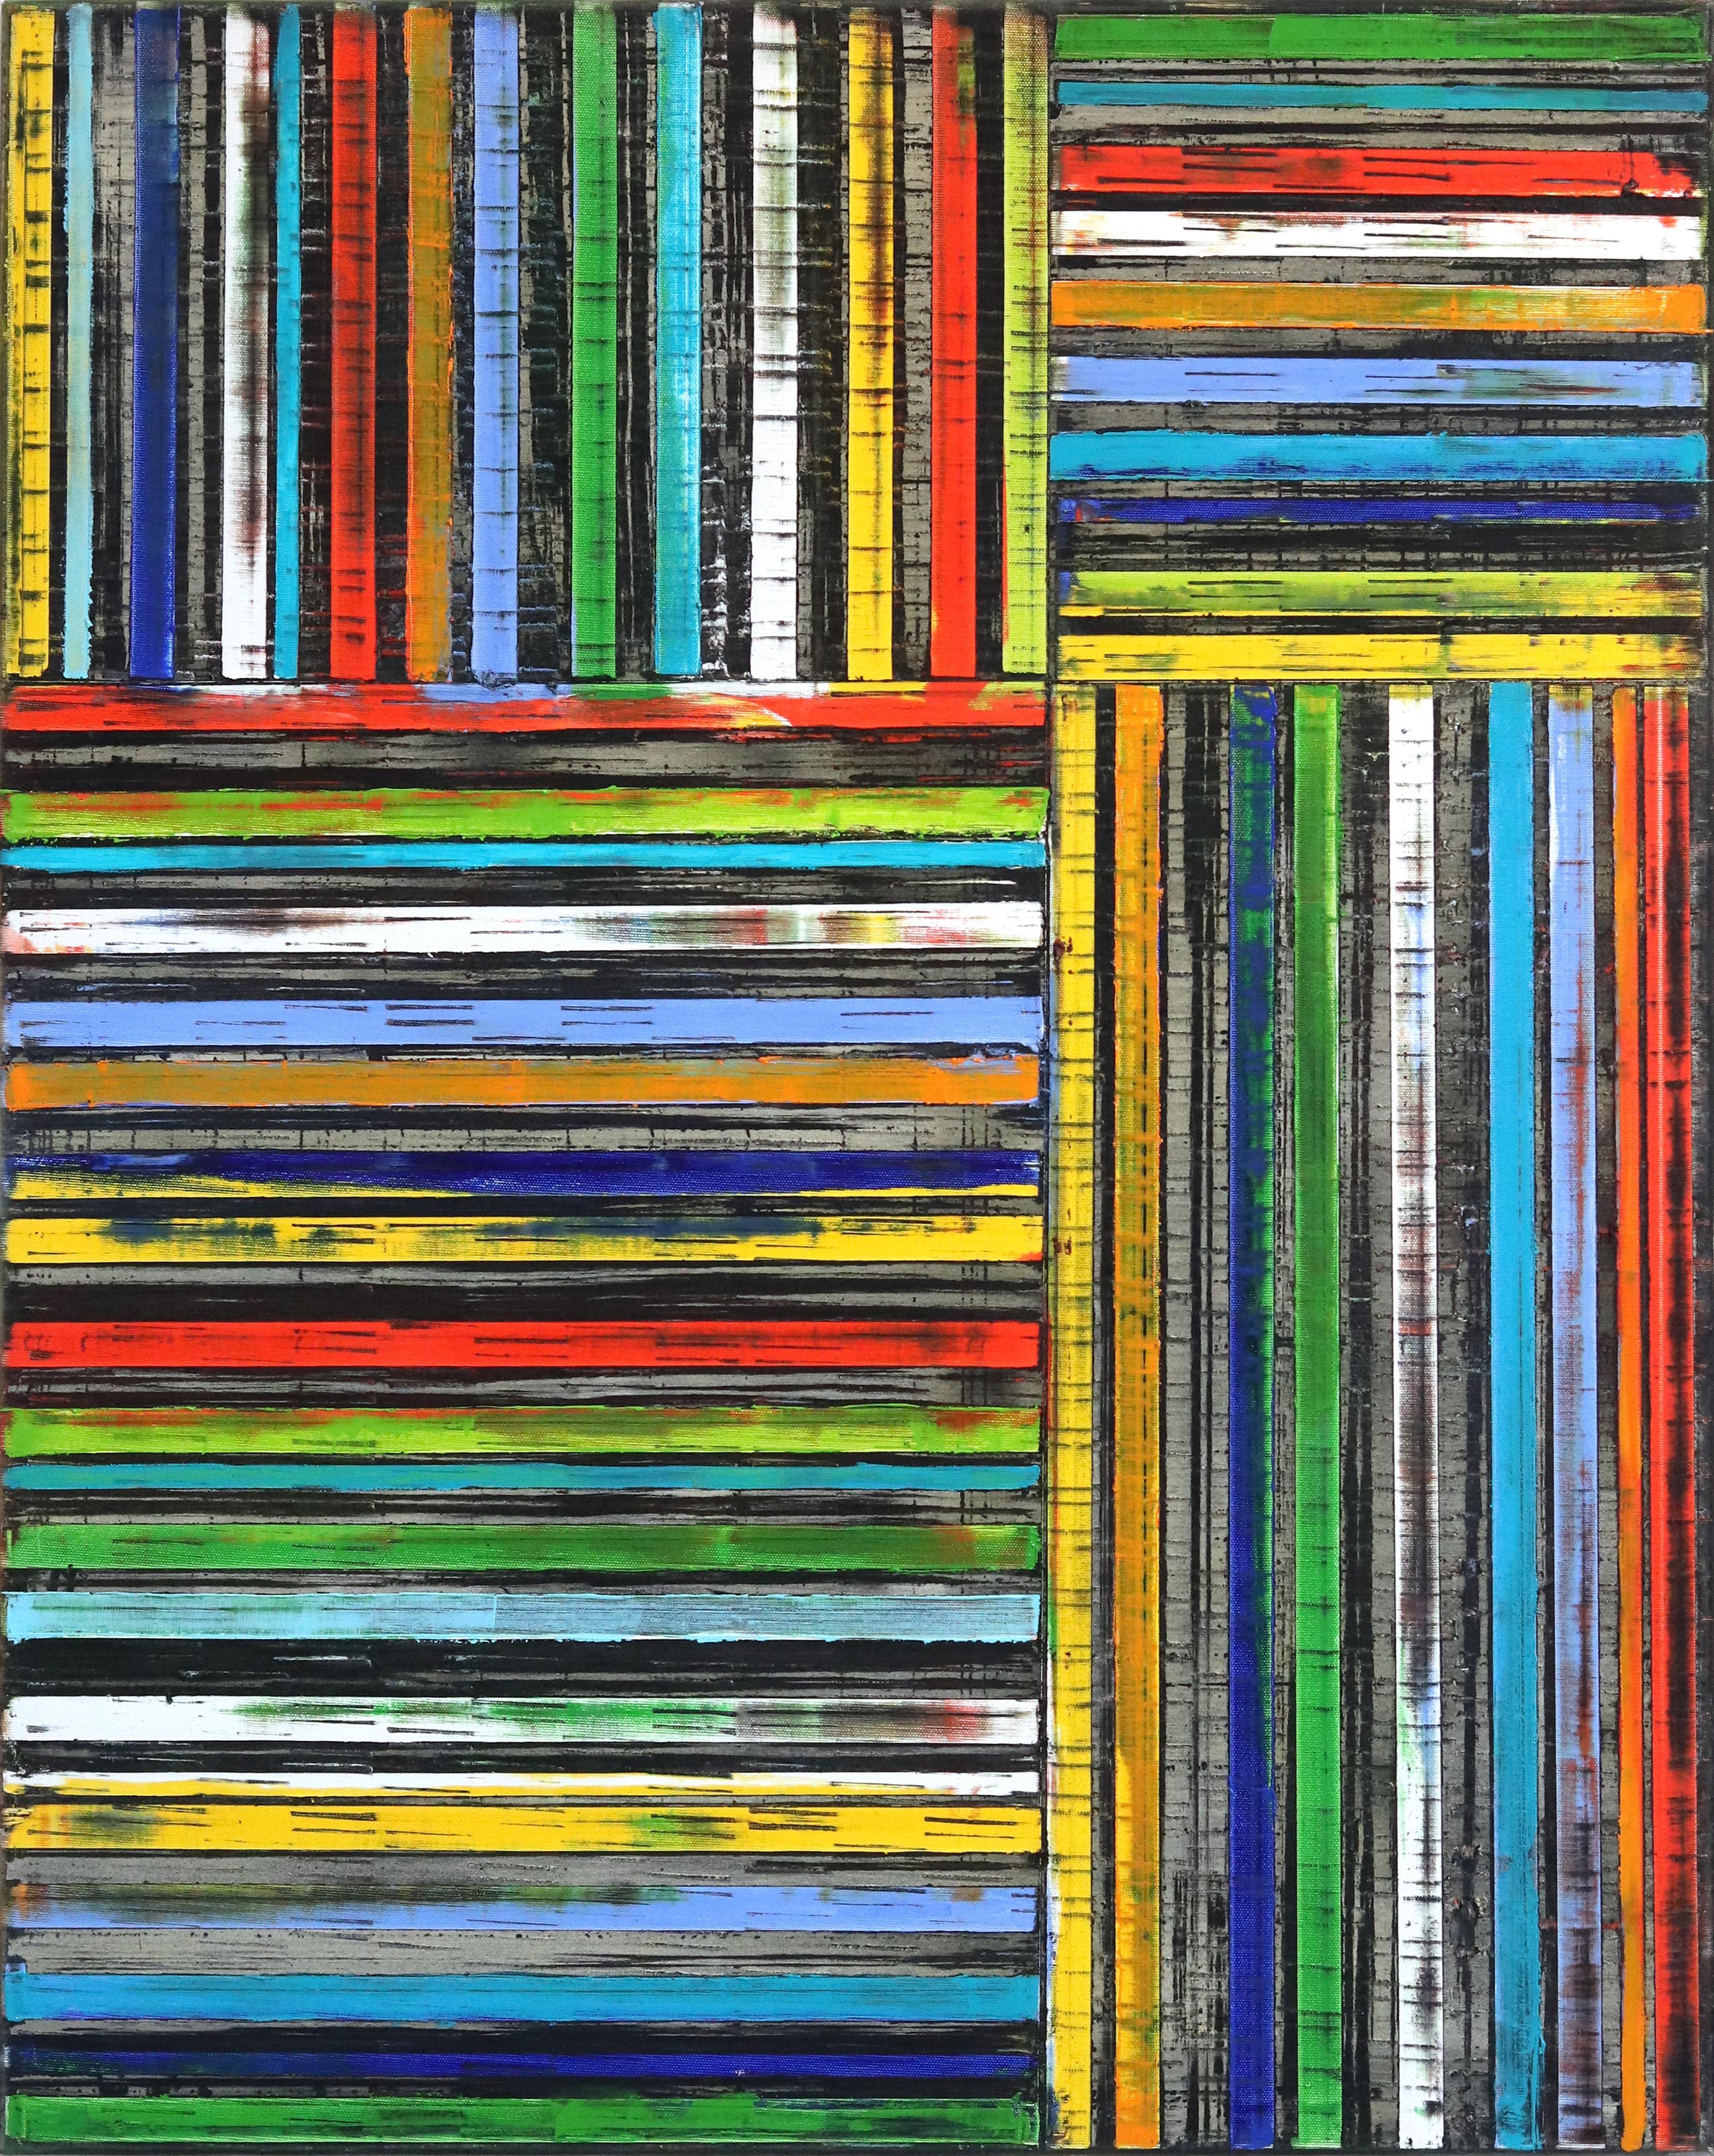 Stripes In Rainbow - Original Colorful Oil Painting Patterned Stripes Texture - Mixed Media Art by Petra Rös-Nickel